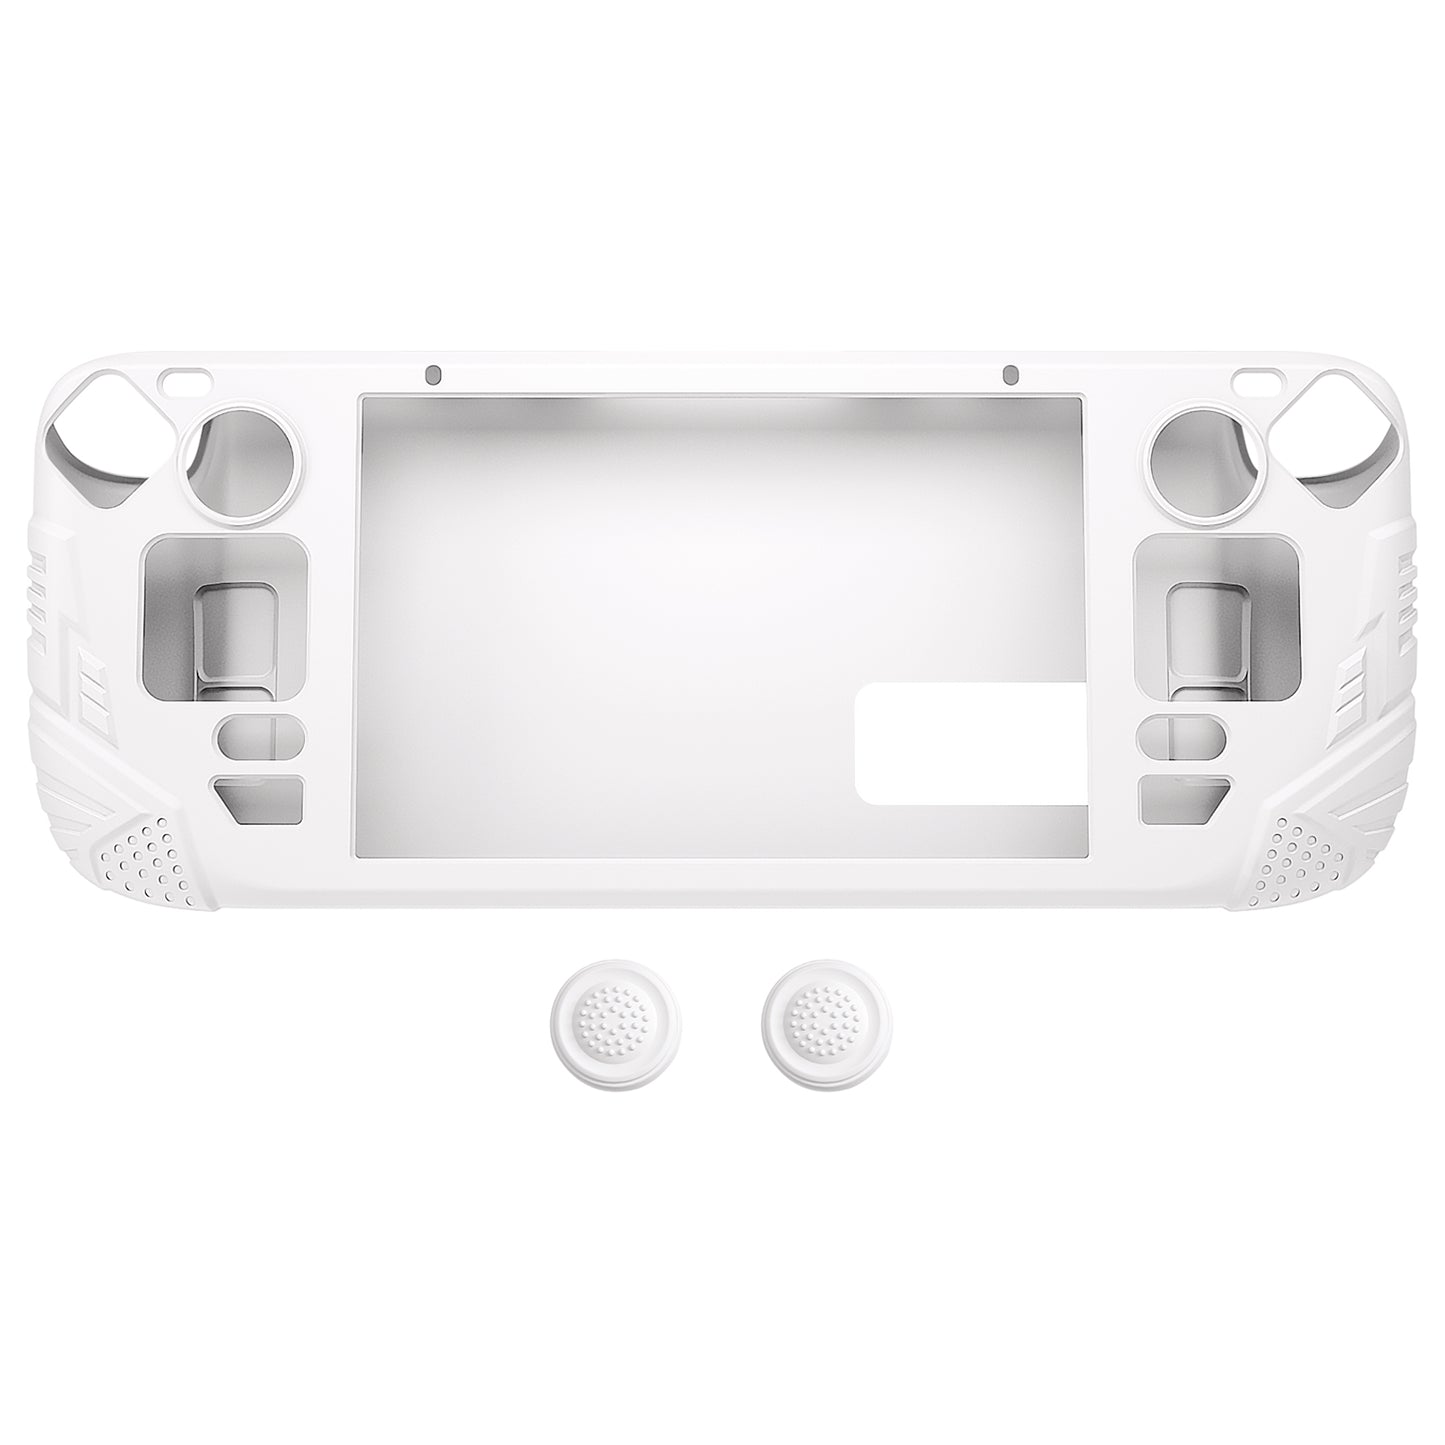 IINE Steam Deck Protective Case 9 in 1 Full Protection,Soft Silicone  Material Shockproof Case,White